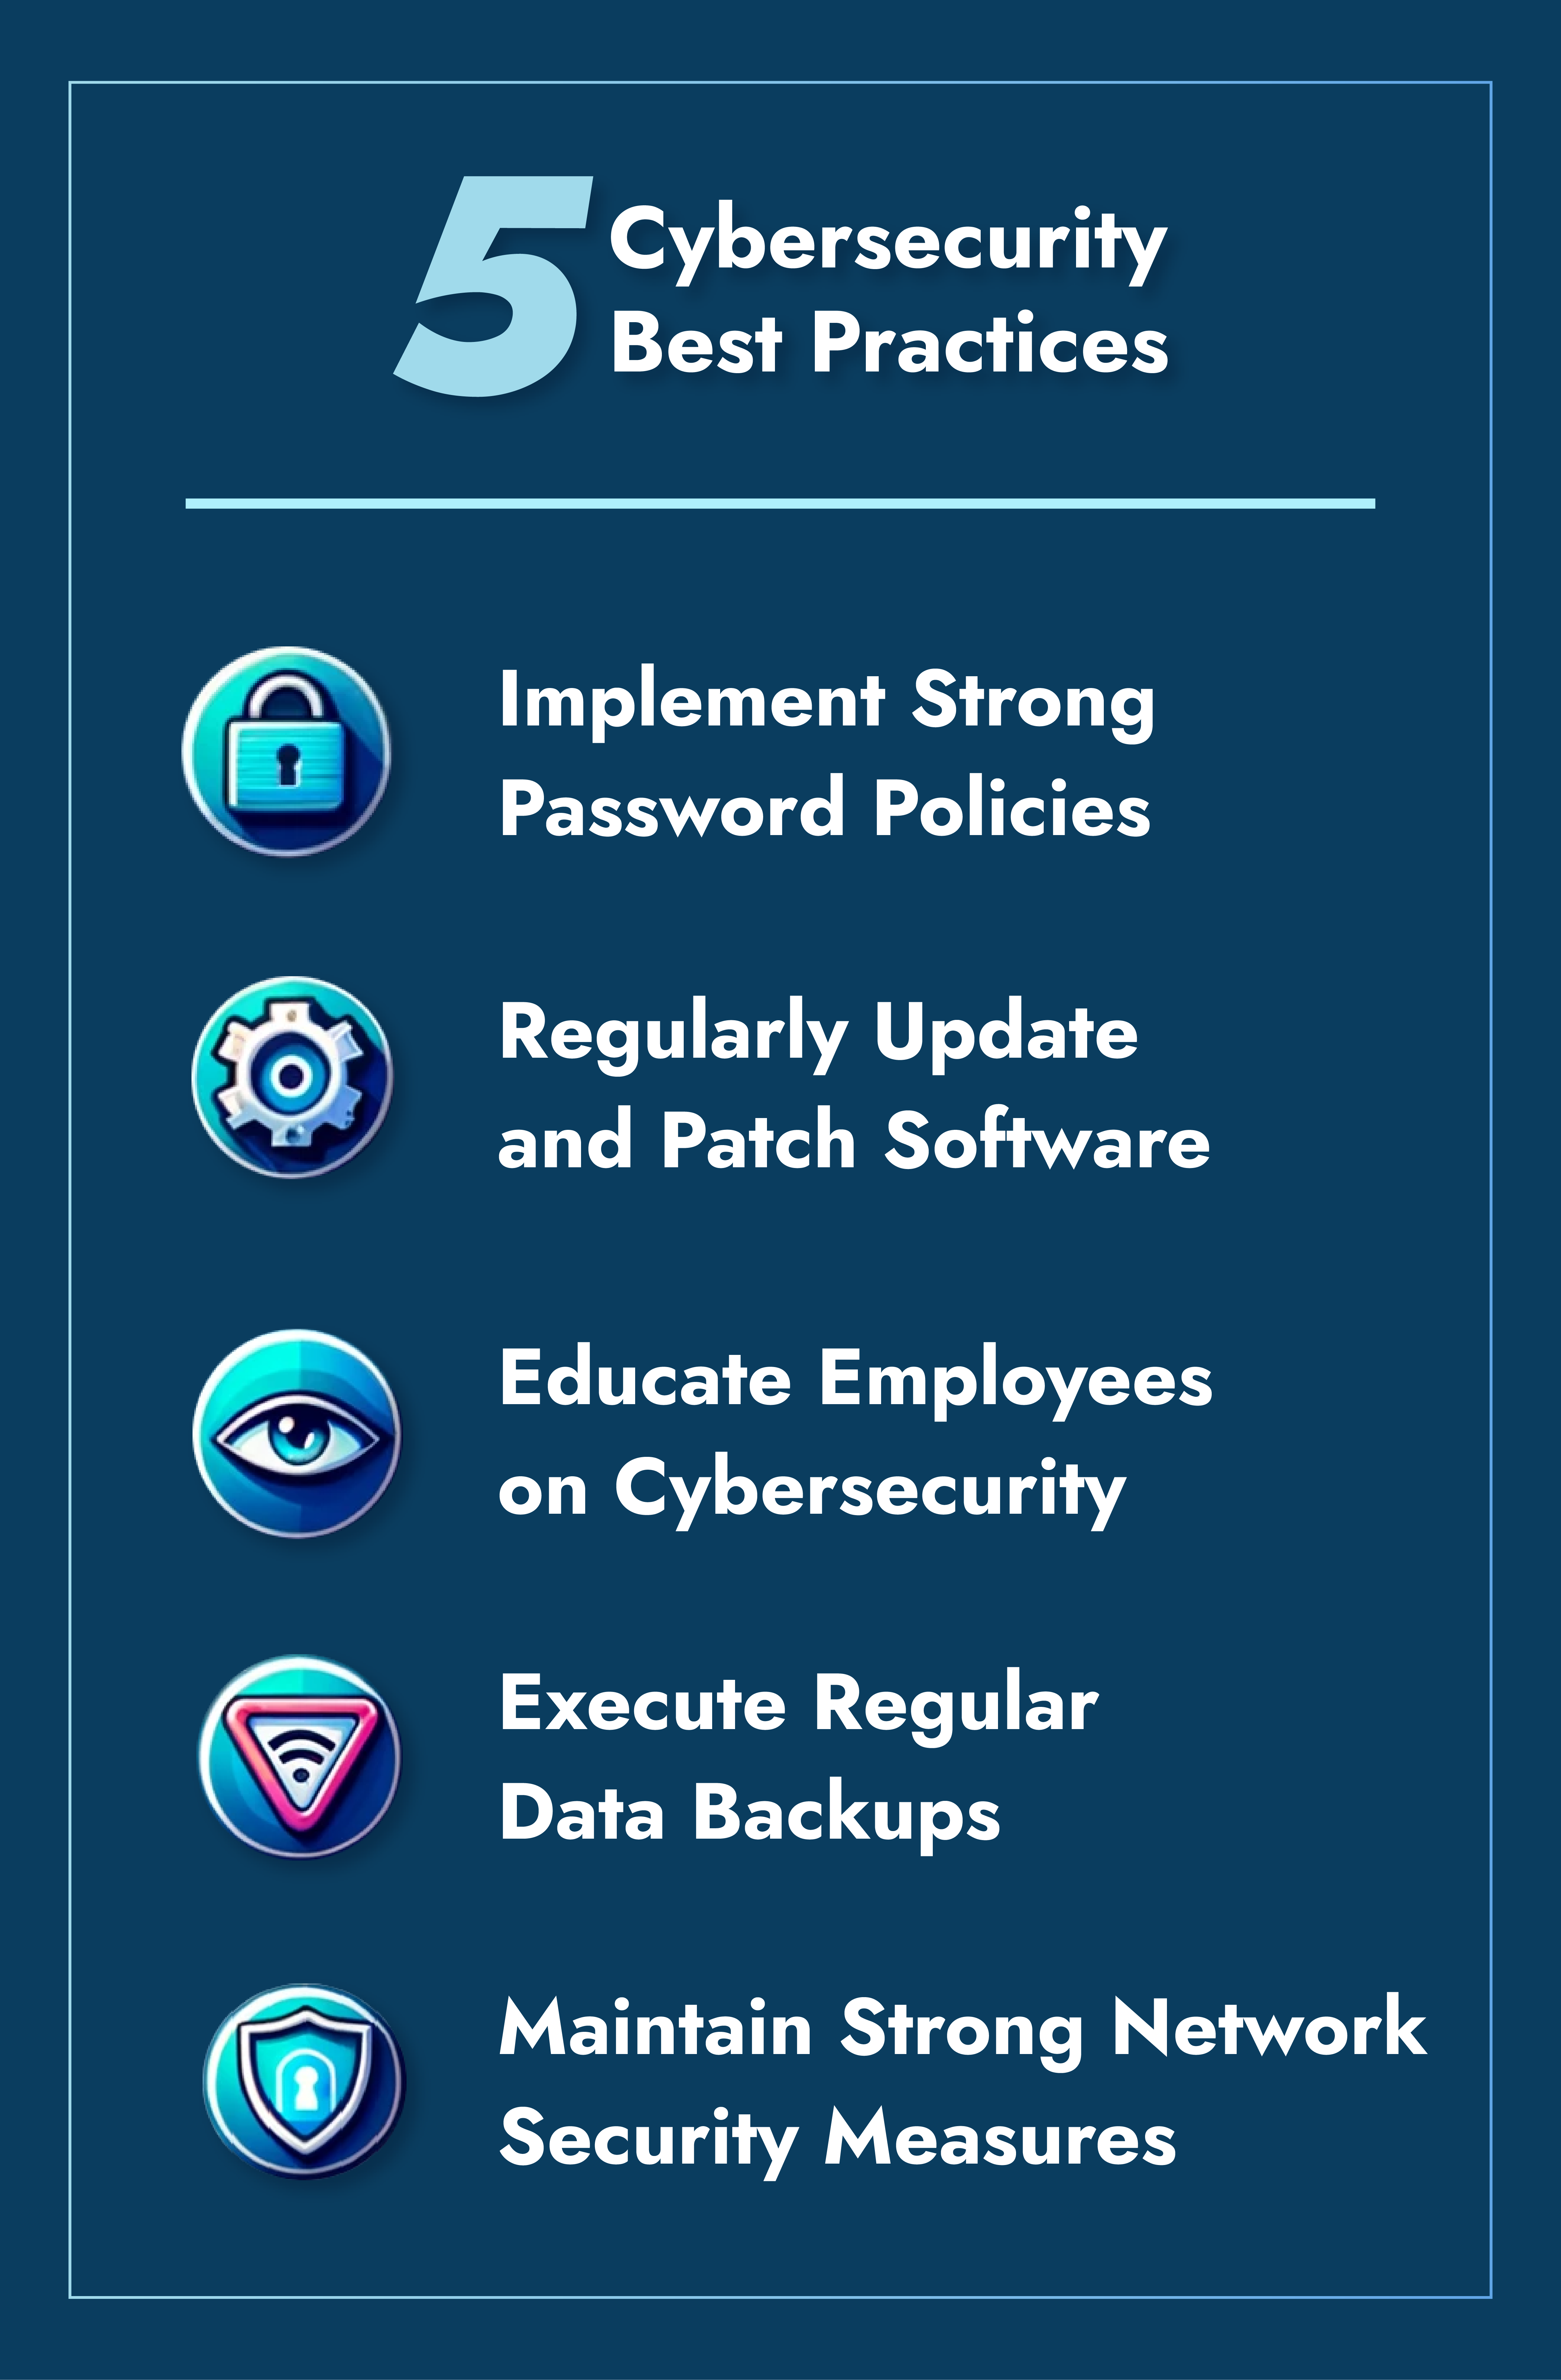 5 cybersecurity best practices infographic